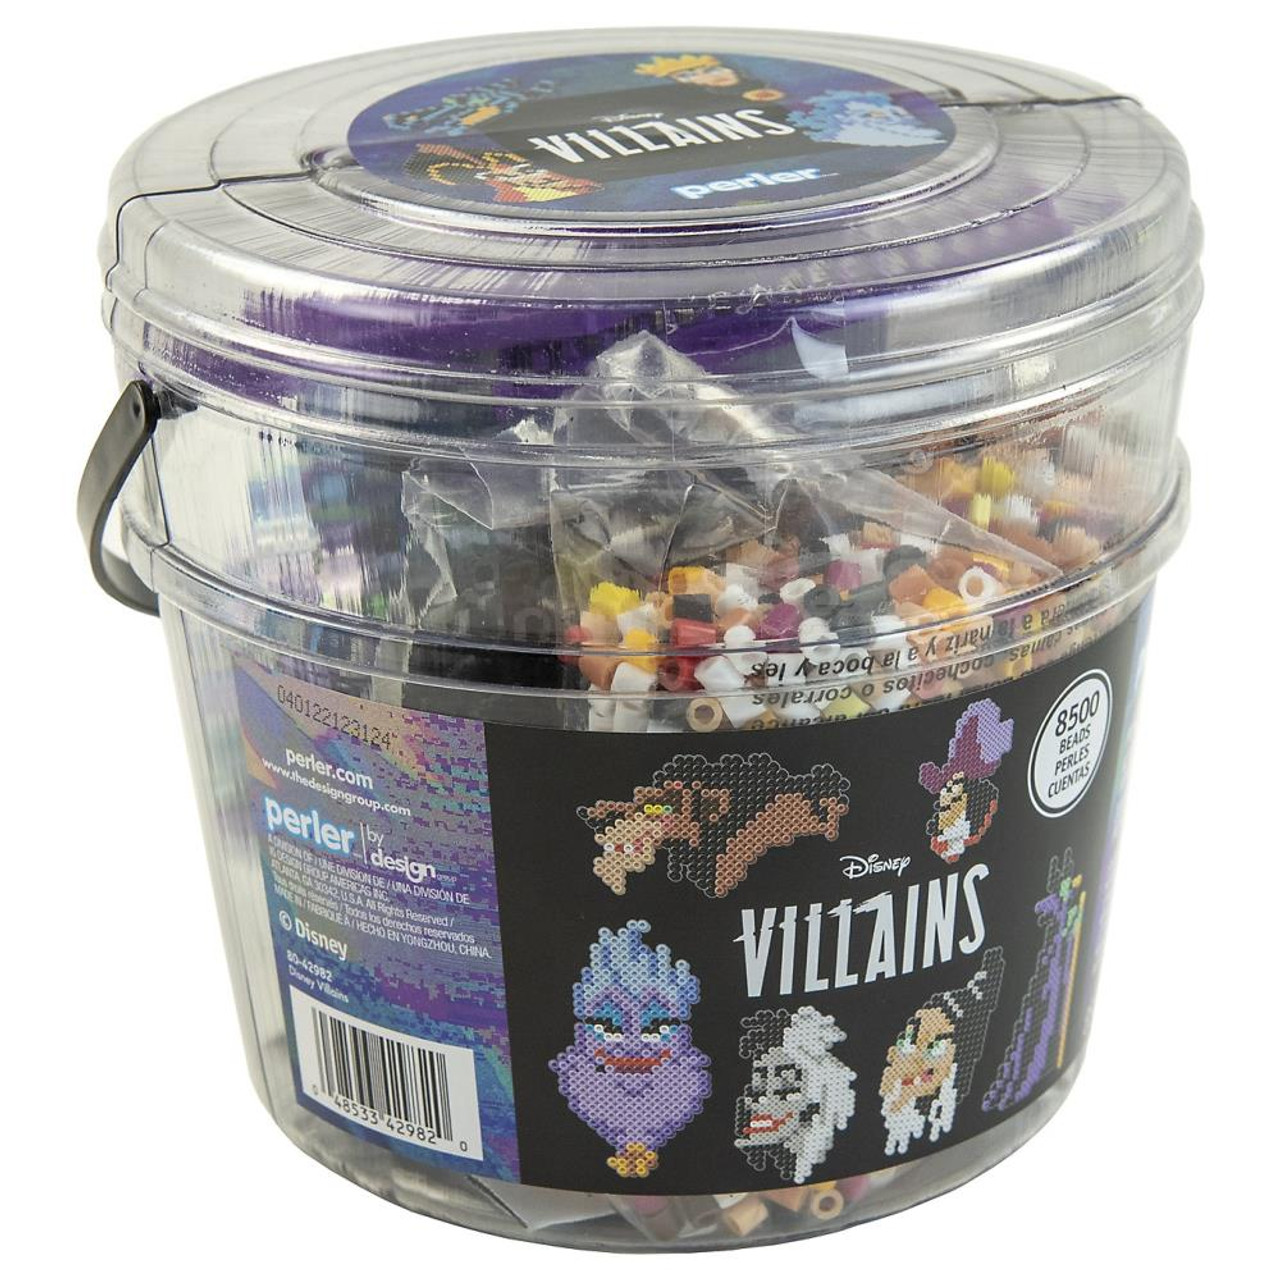  Perler Storage Bucket Beads Container Set, 8 pcs : Arts, Crafts  & Sewing